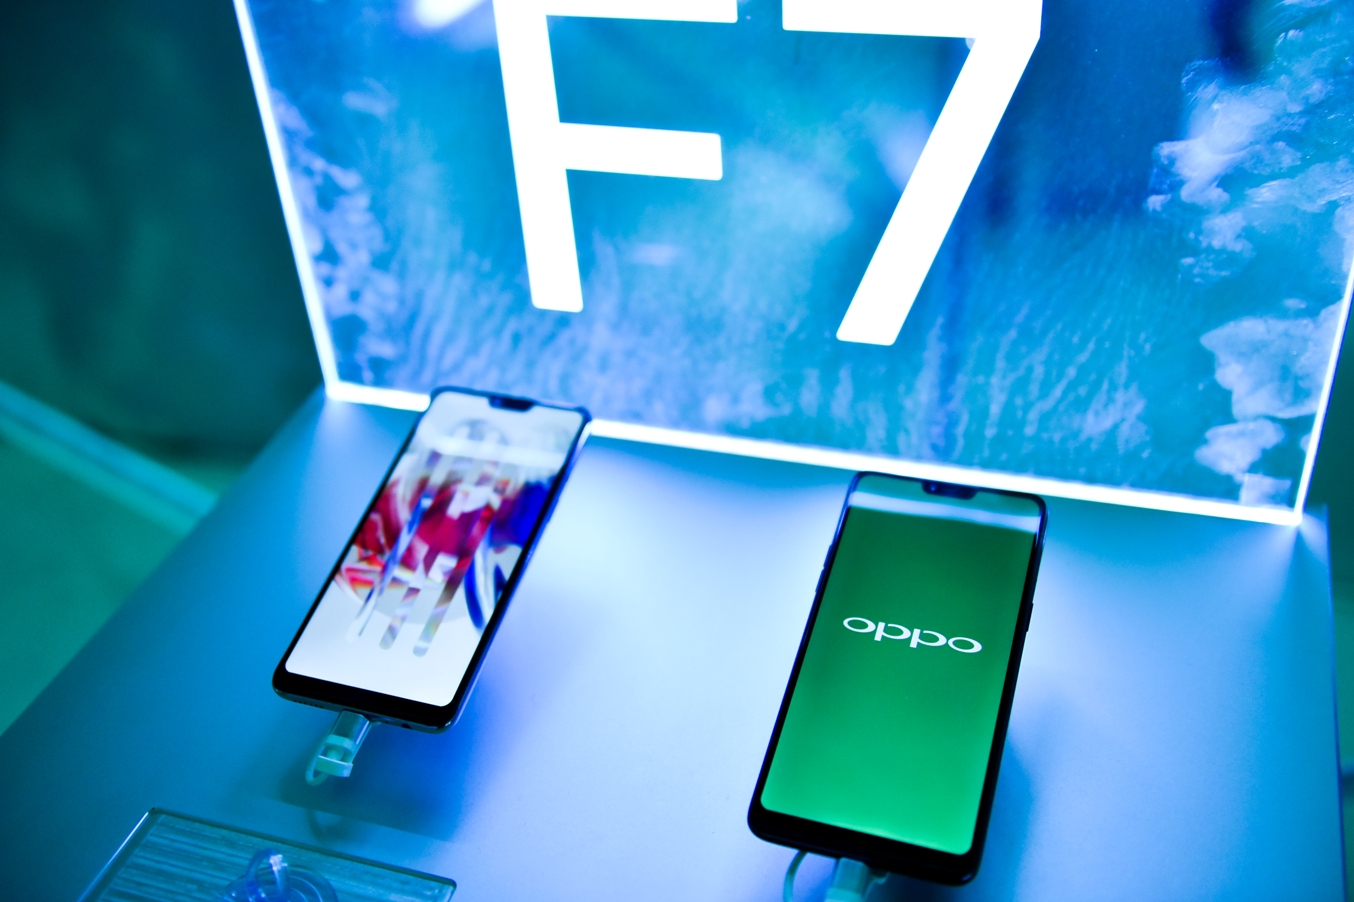 OPPO’s new flagship model is bringing smartphone photography to the next level